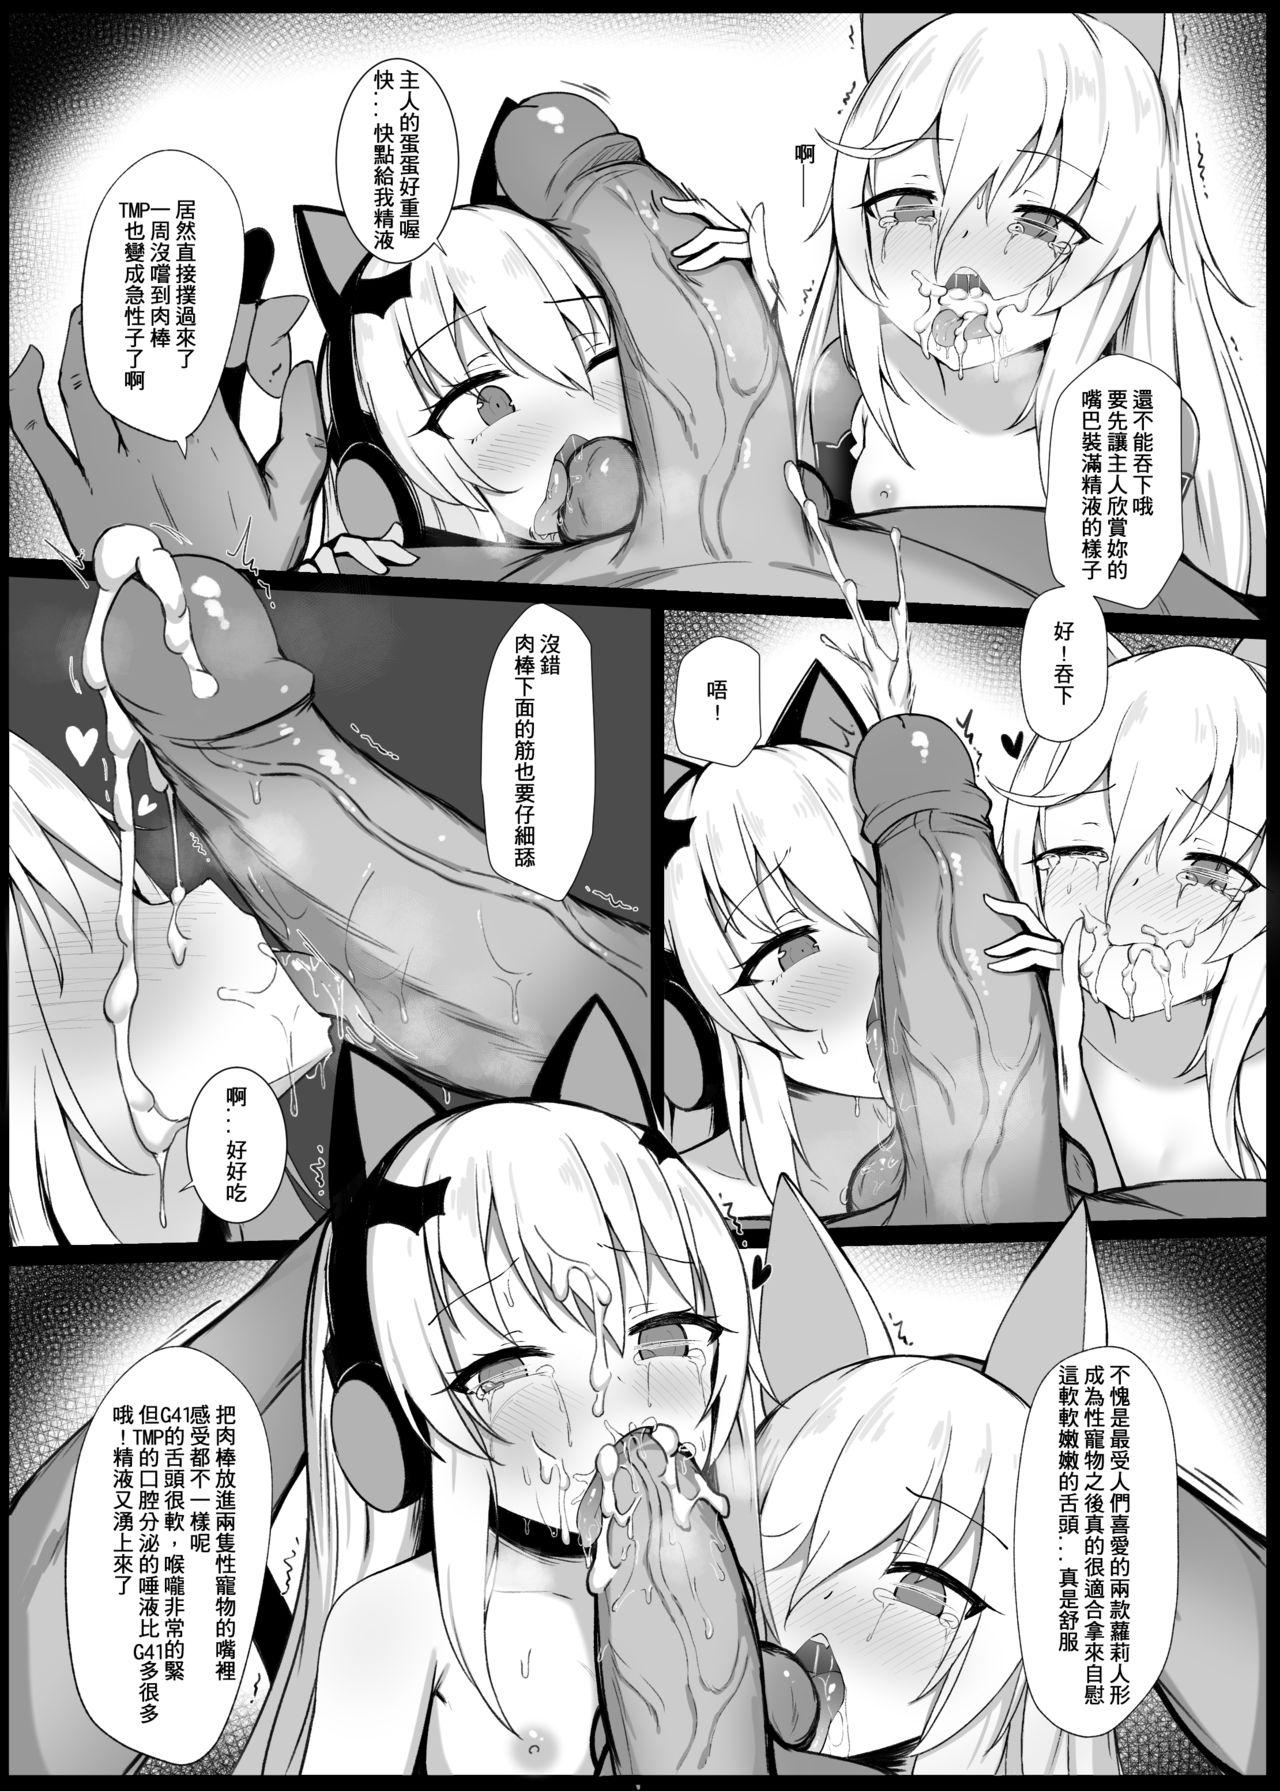 Muscles Commander's Pet - Girls frontline Fucked - Page 8